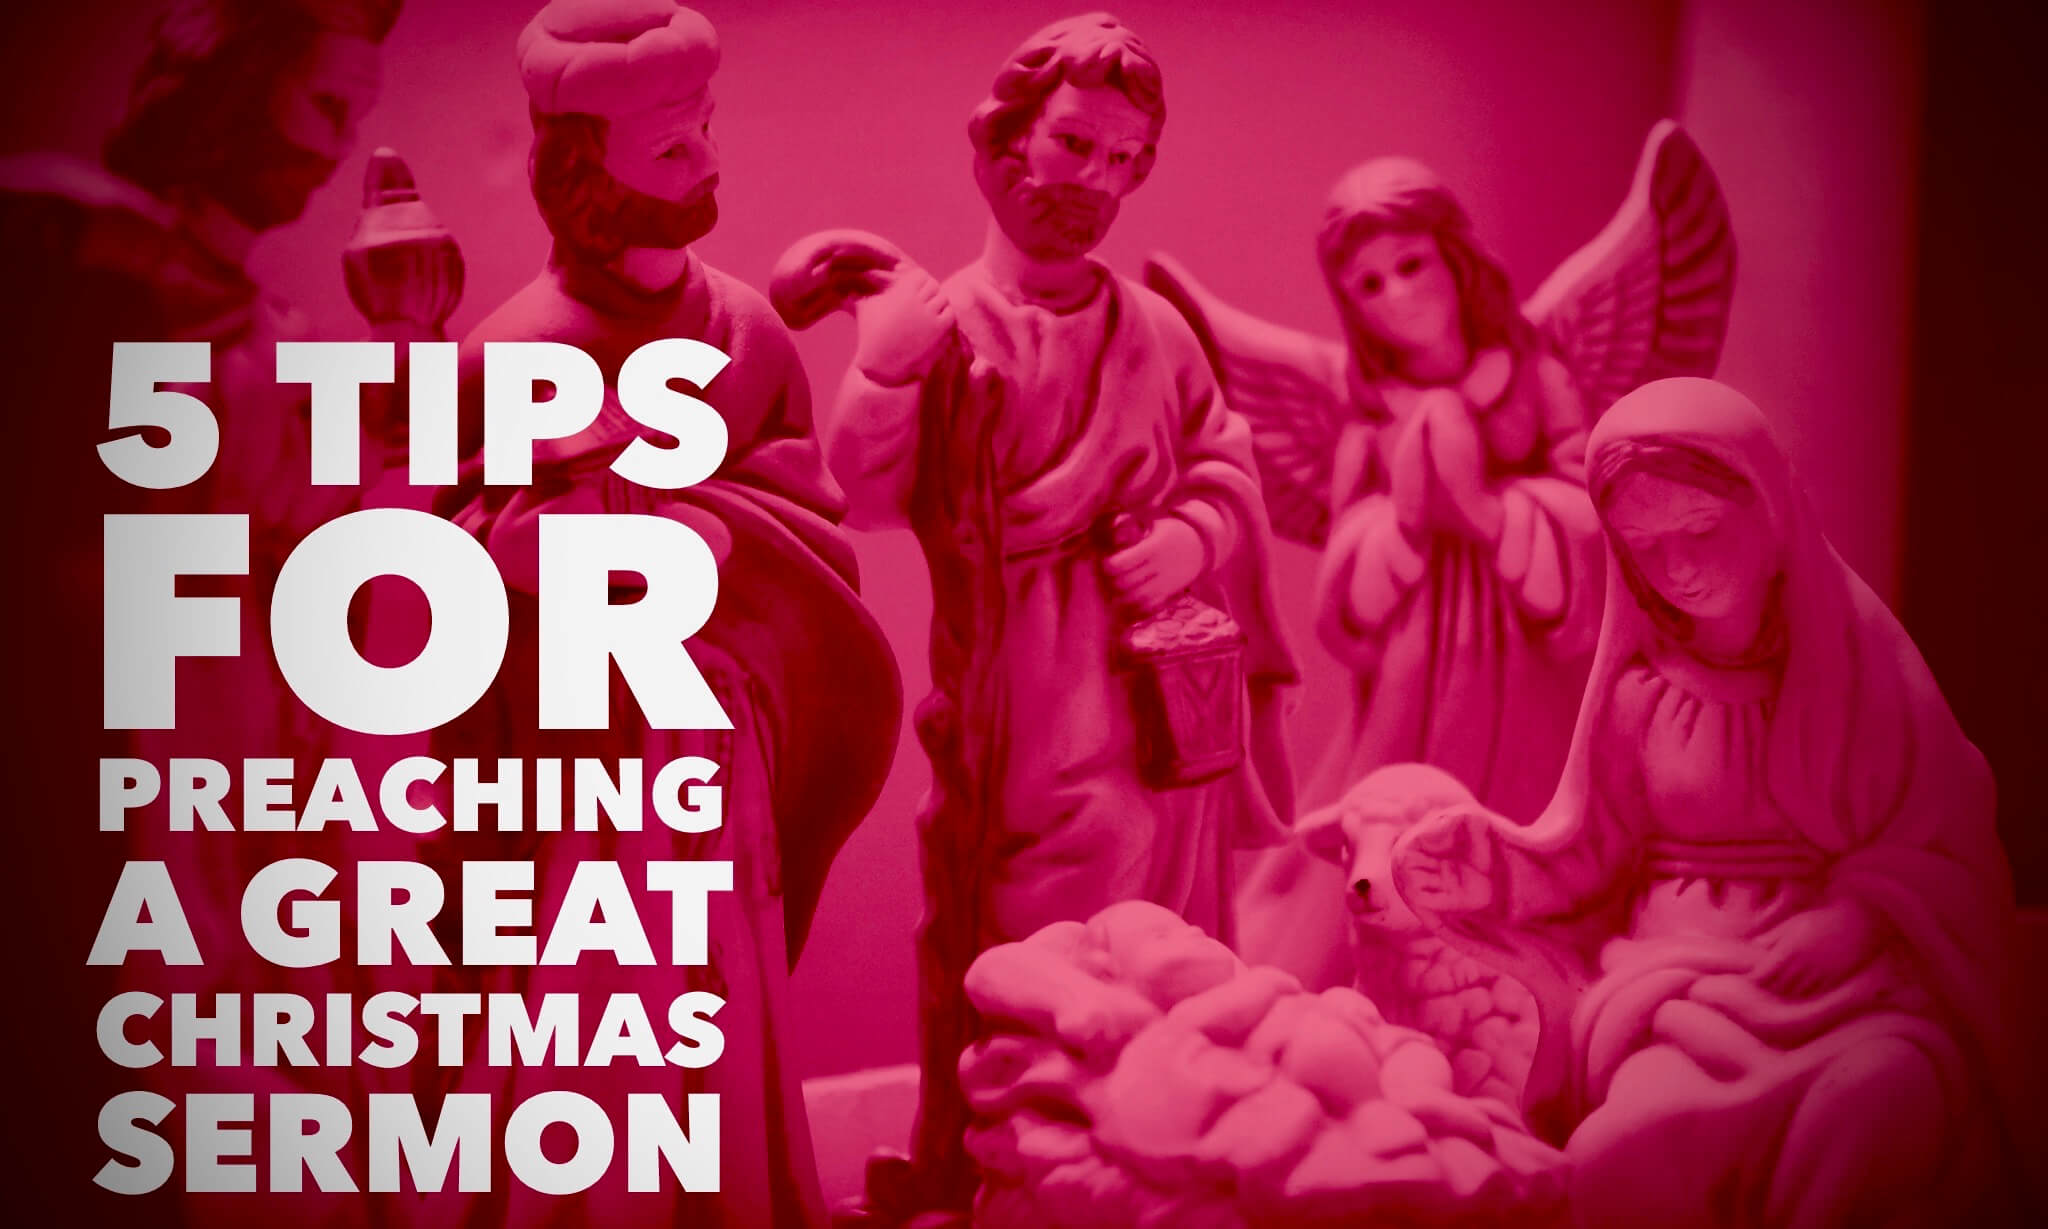 5 Tips for Preaching a Great Christmas Sermon